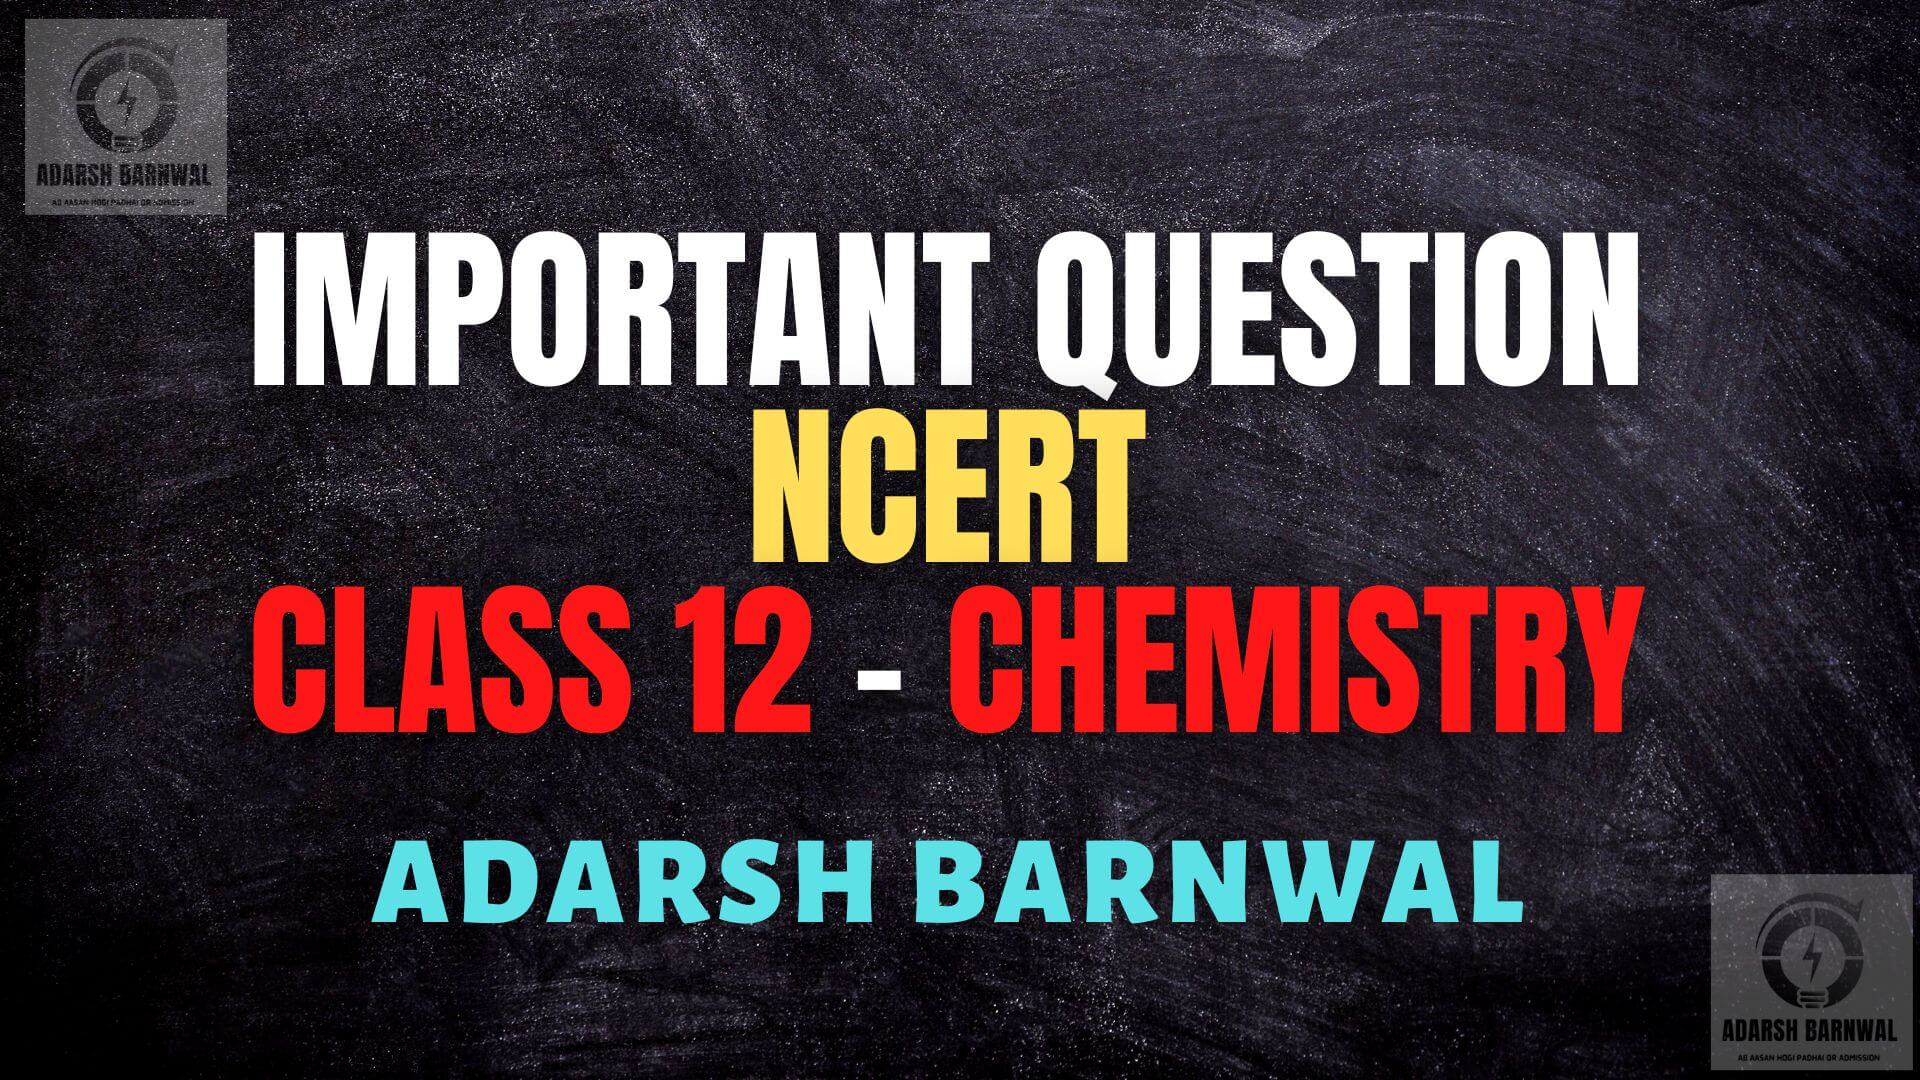 Class 12 Chemistry Most Important Questions of NCERT by adarsh barnwal